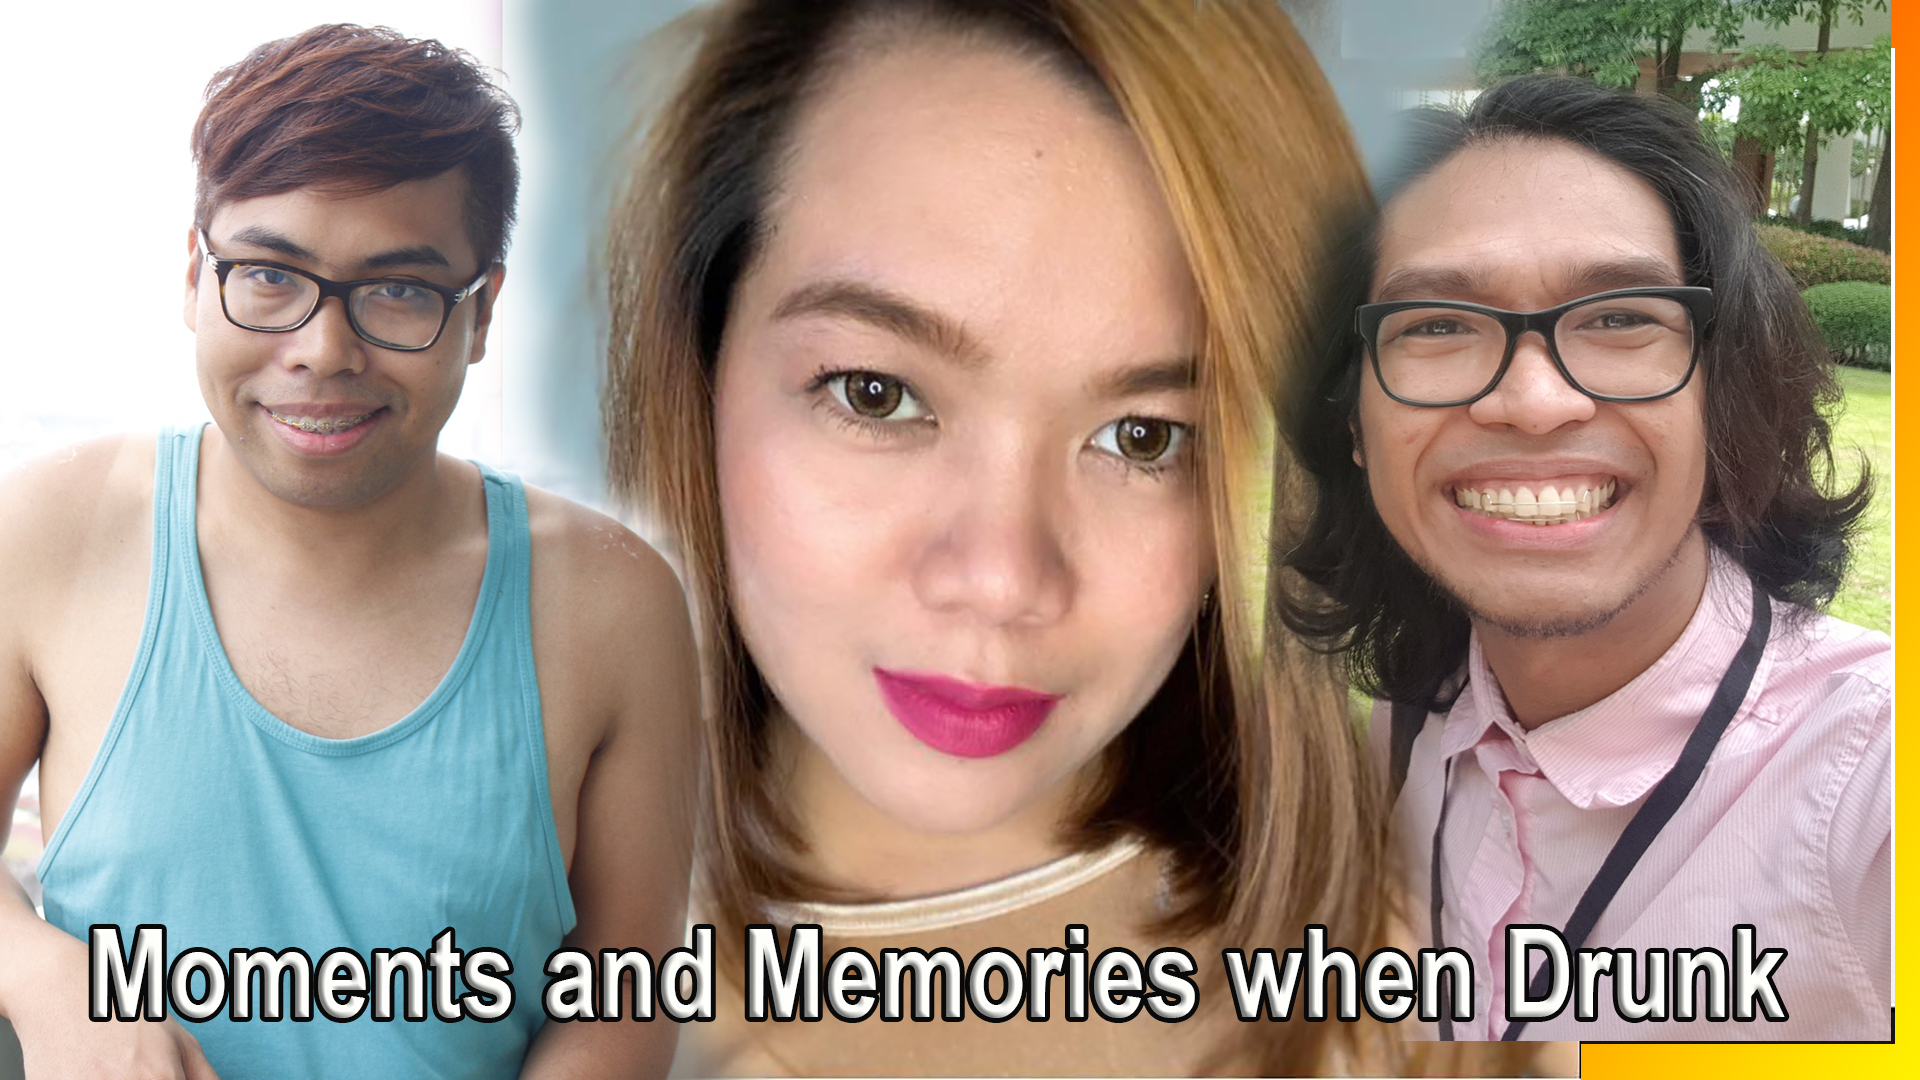 Live Podcast with Jonathan Orbuda , William Pombo and Apple Bejo, adulting 101,Funny Drunk Moments,pinoy podcast funny,humor,comedy,comedy video,livestream events,adulting 101 for college students 